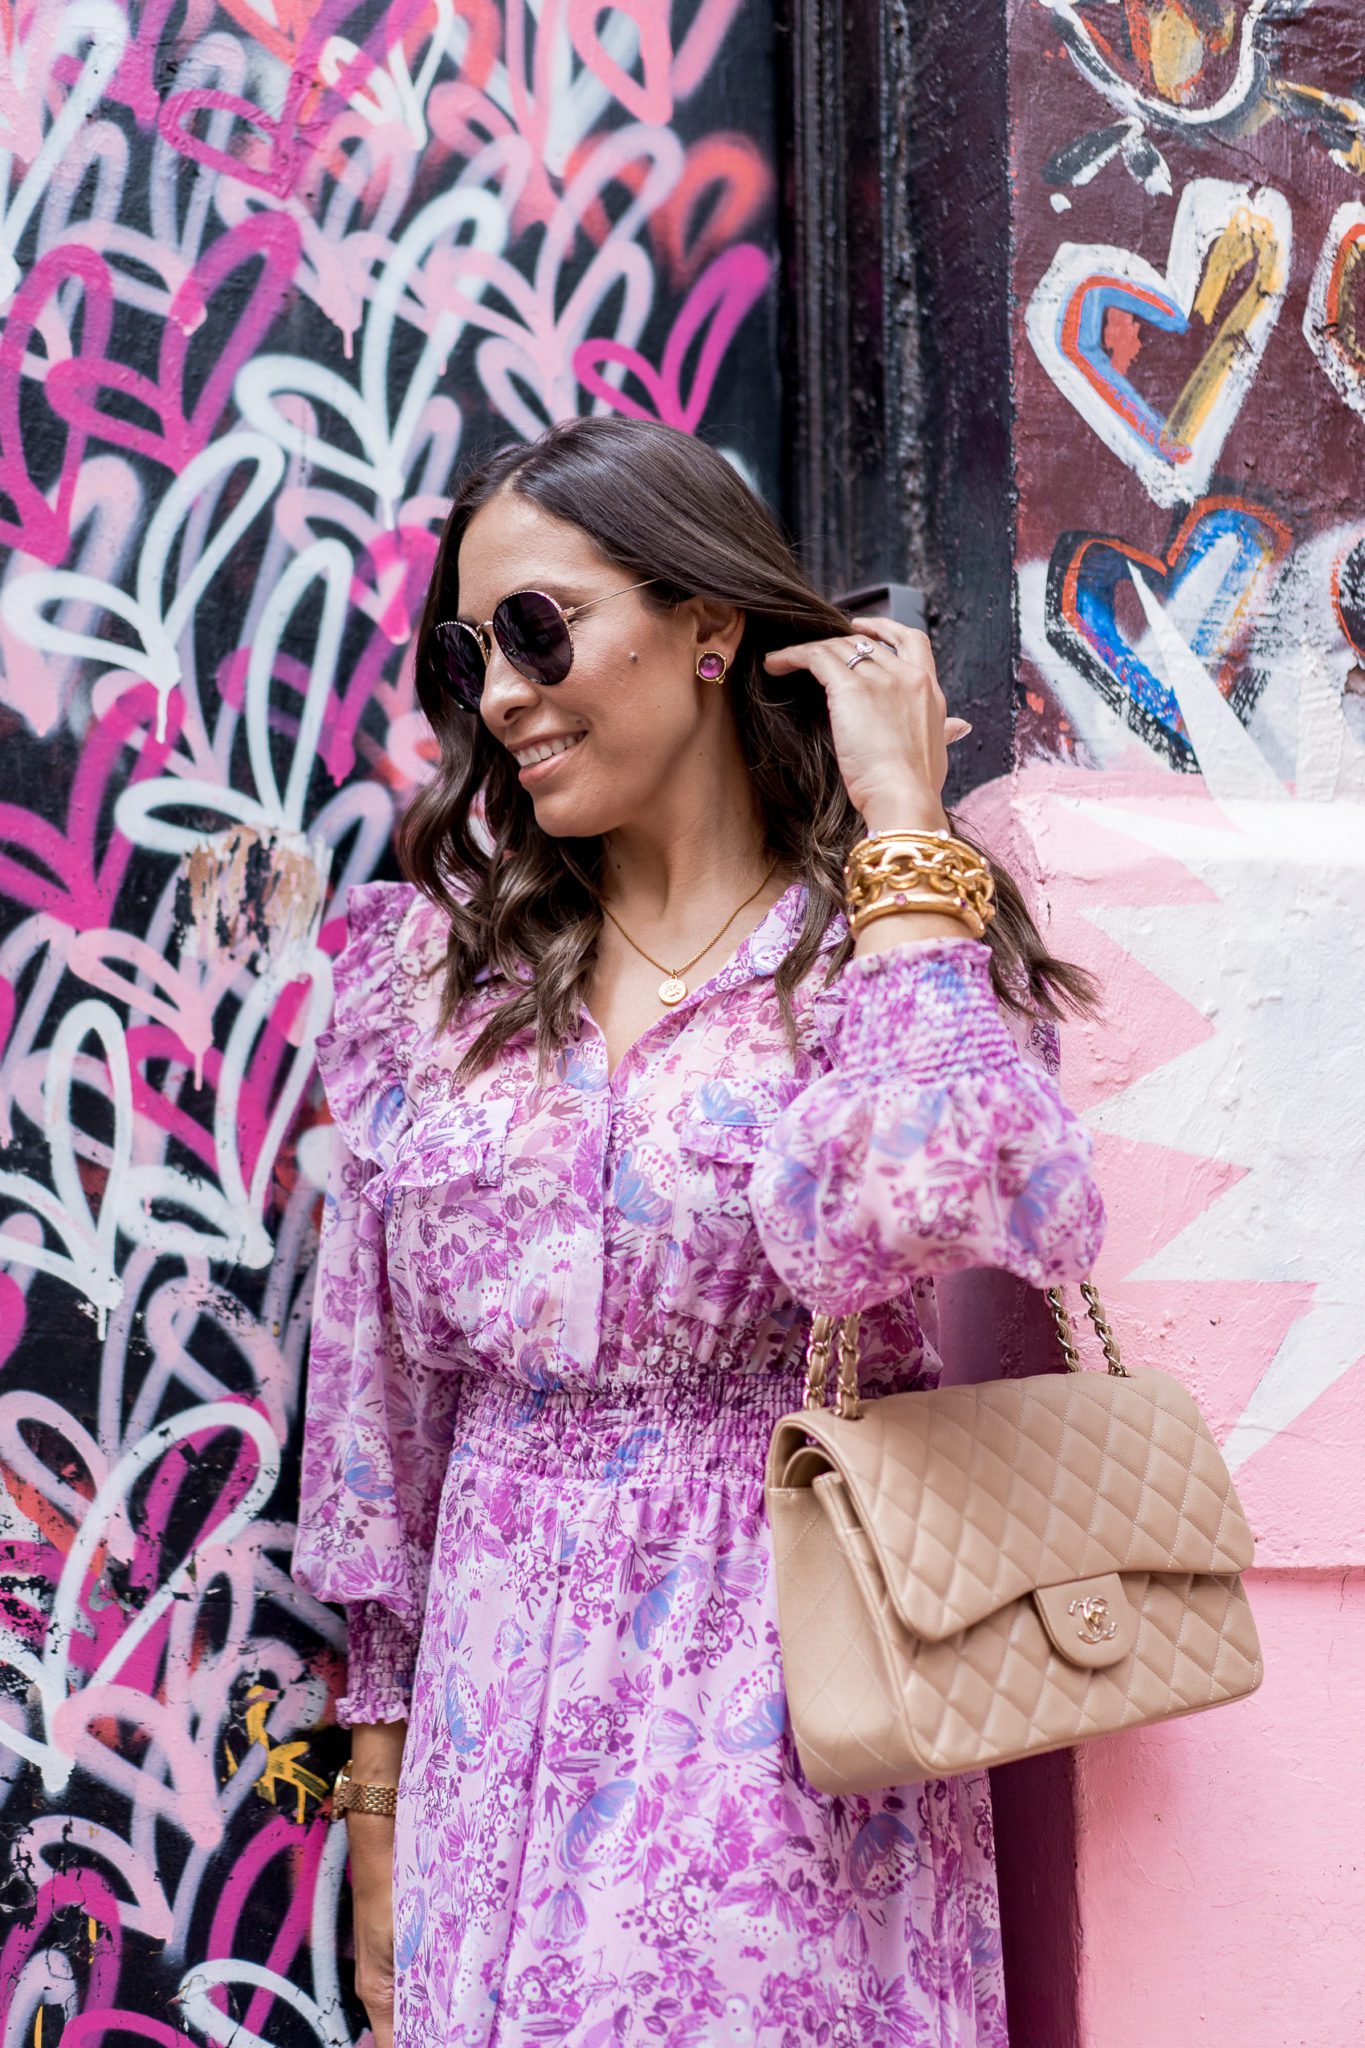 Julie Vos Favorites by popular Florida fashion blog, A Glam Lifestyle: image of a woman standing by a heart wall mural and wearing a purple dress, Julie Vos Catalina Hinge Bangle and Julie Vos Savannah Demi Link Bracelet.